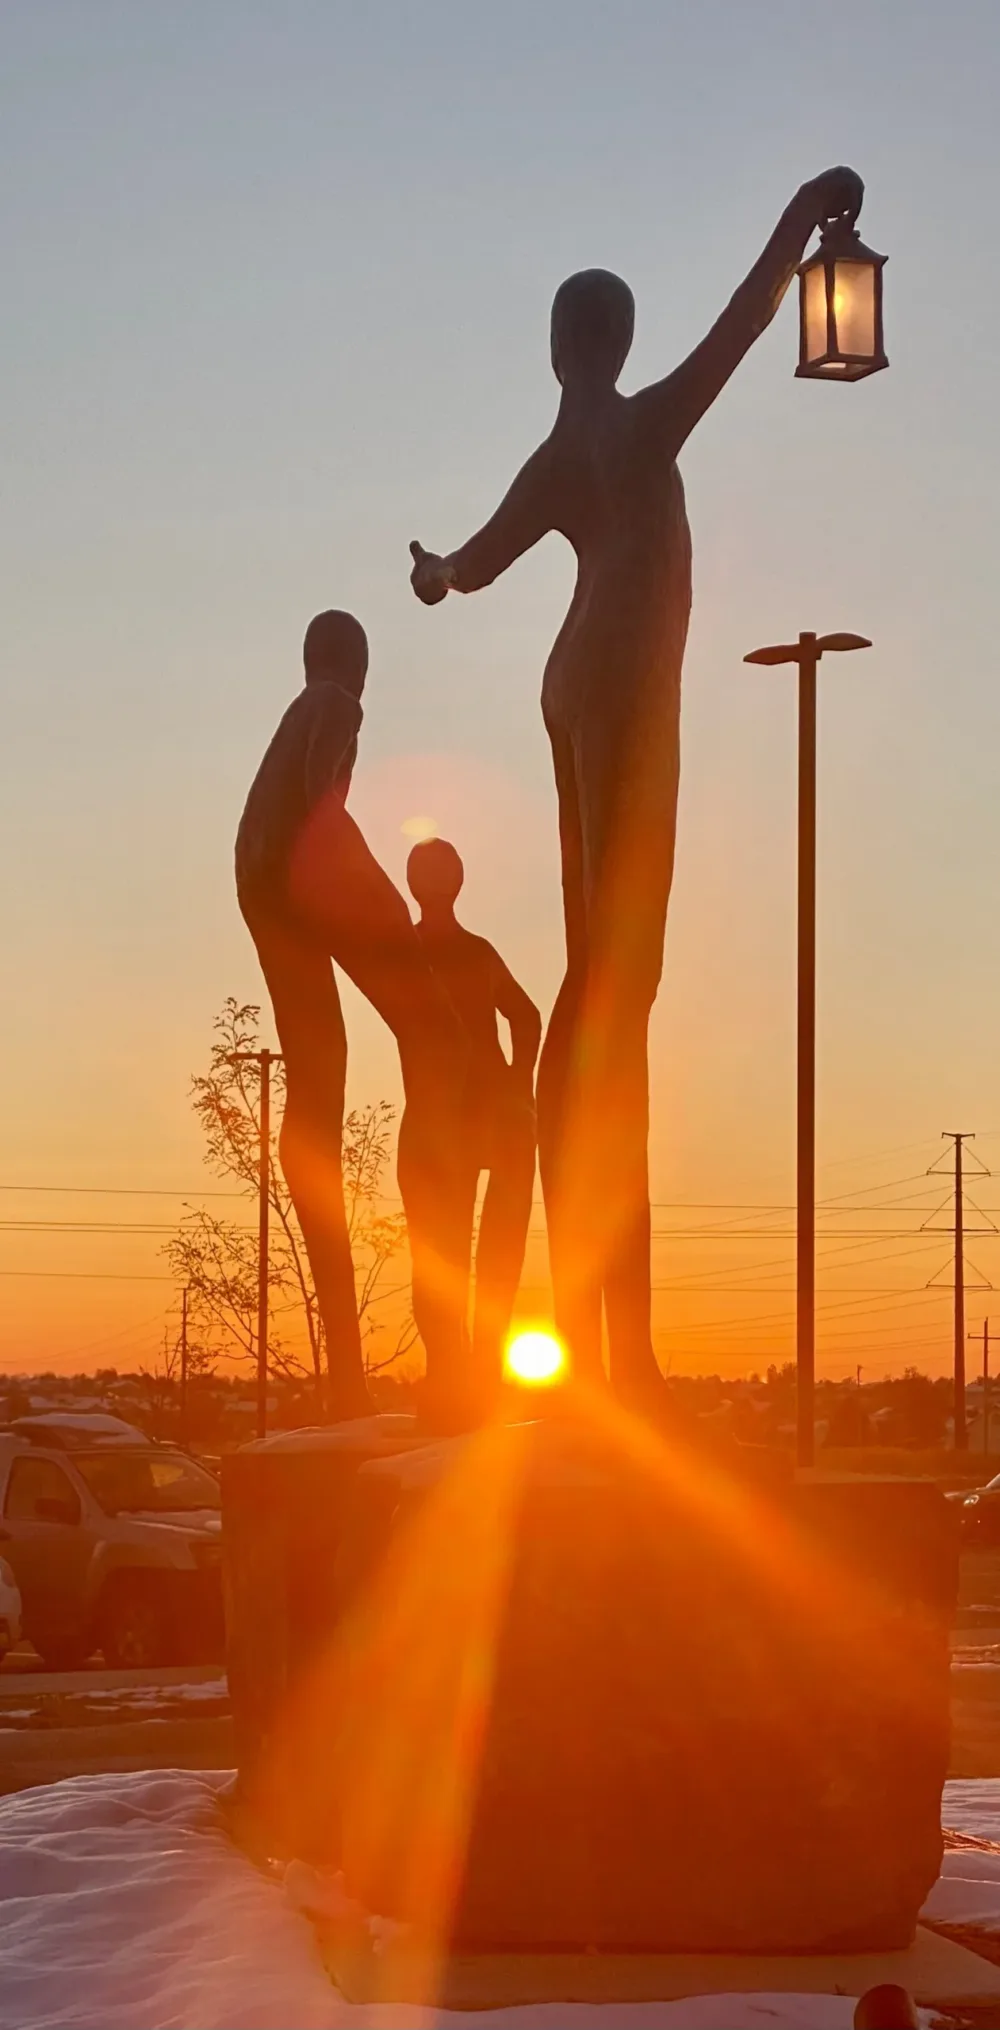 "The Journey" bronze sculpture at the entrance of the Acute Care facility radiates hope at sunrise.